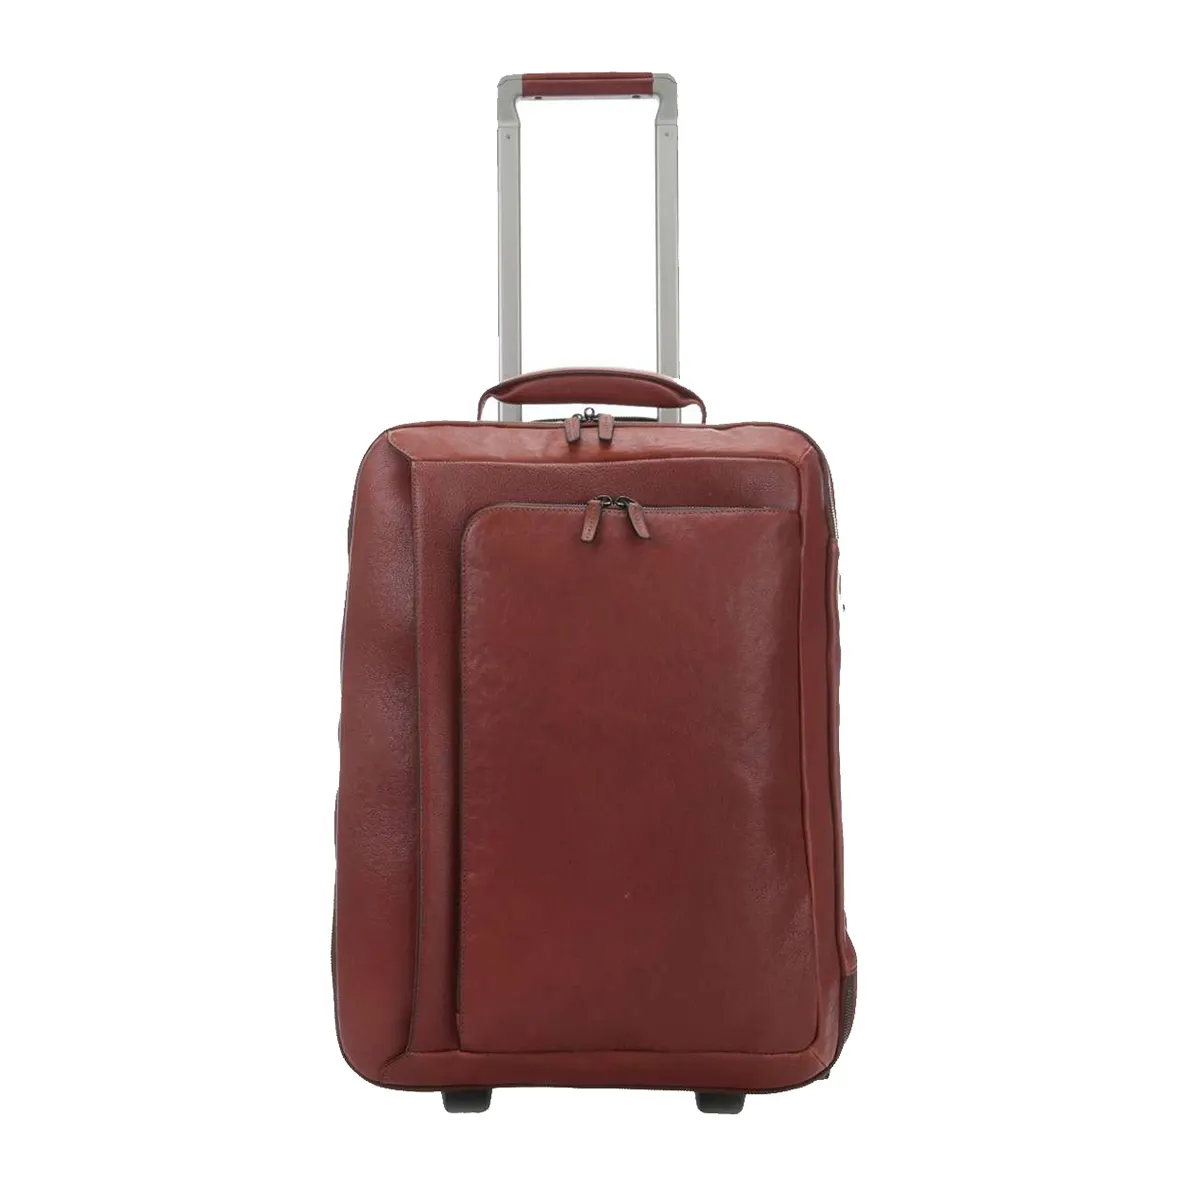 Best Selling High Quality Light Weight Cowhide Leather Trolley Bags OEM Service Long Life Durable OESM Service Trolley Bags